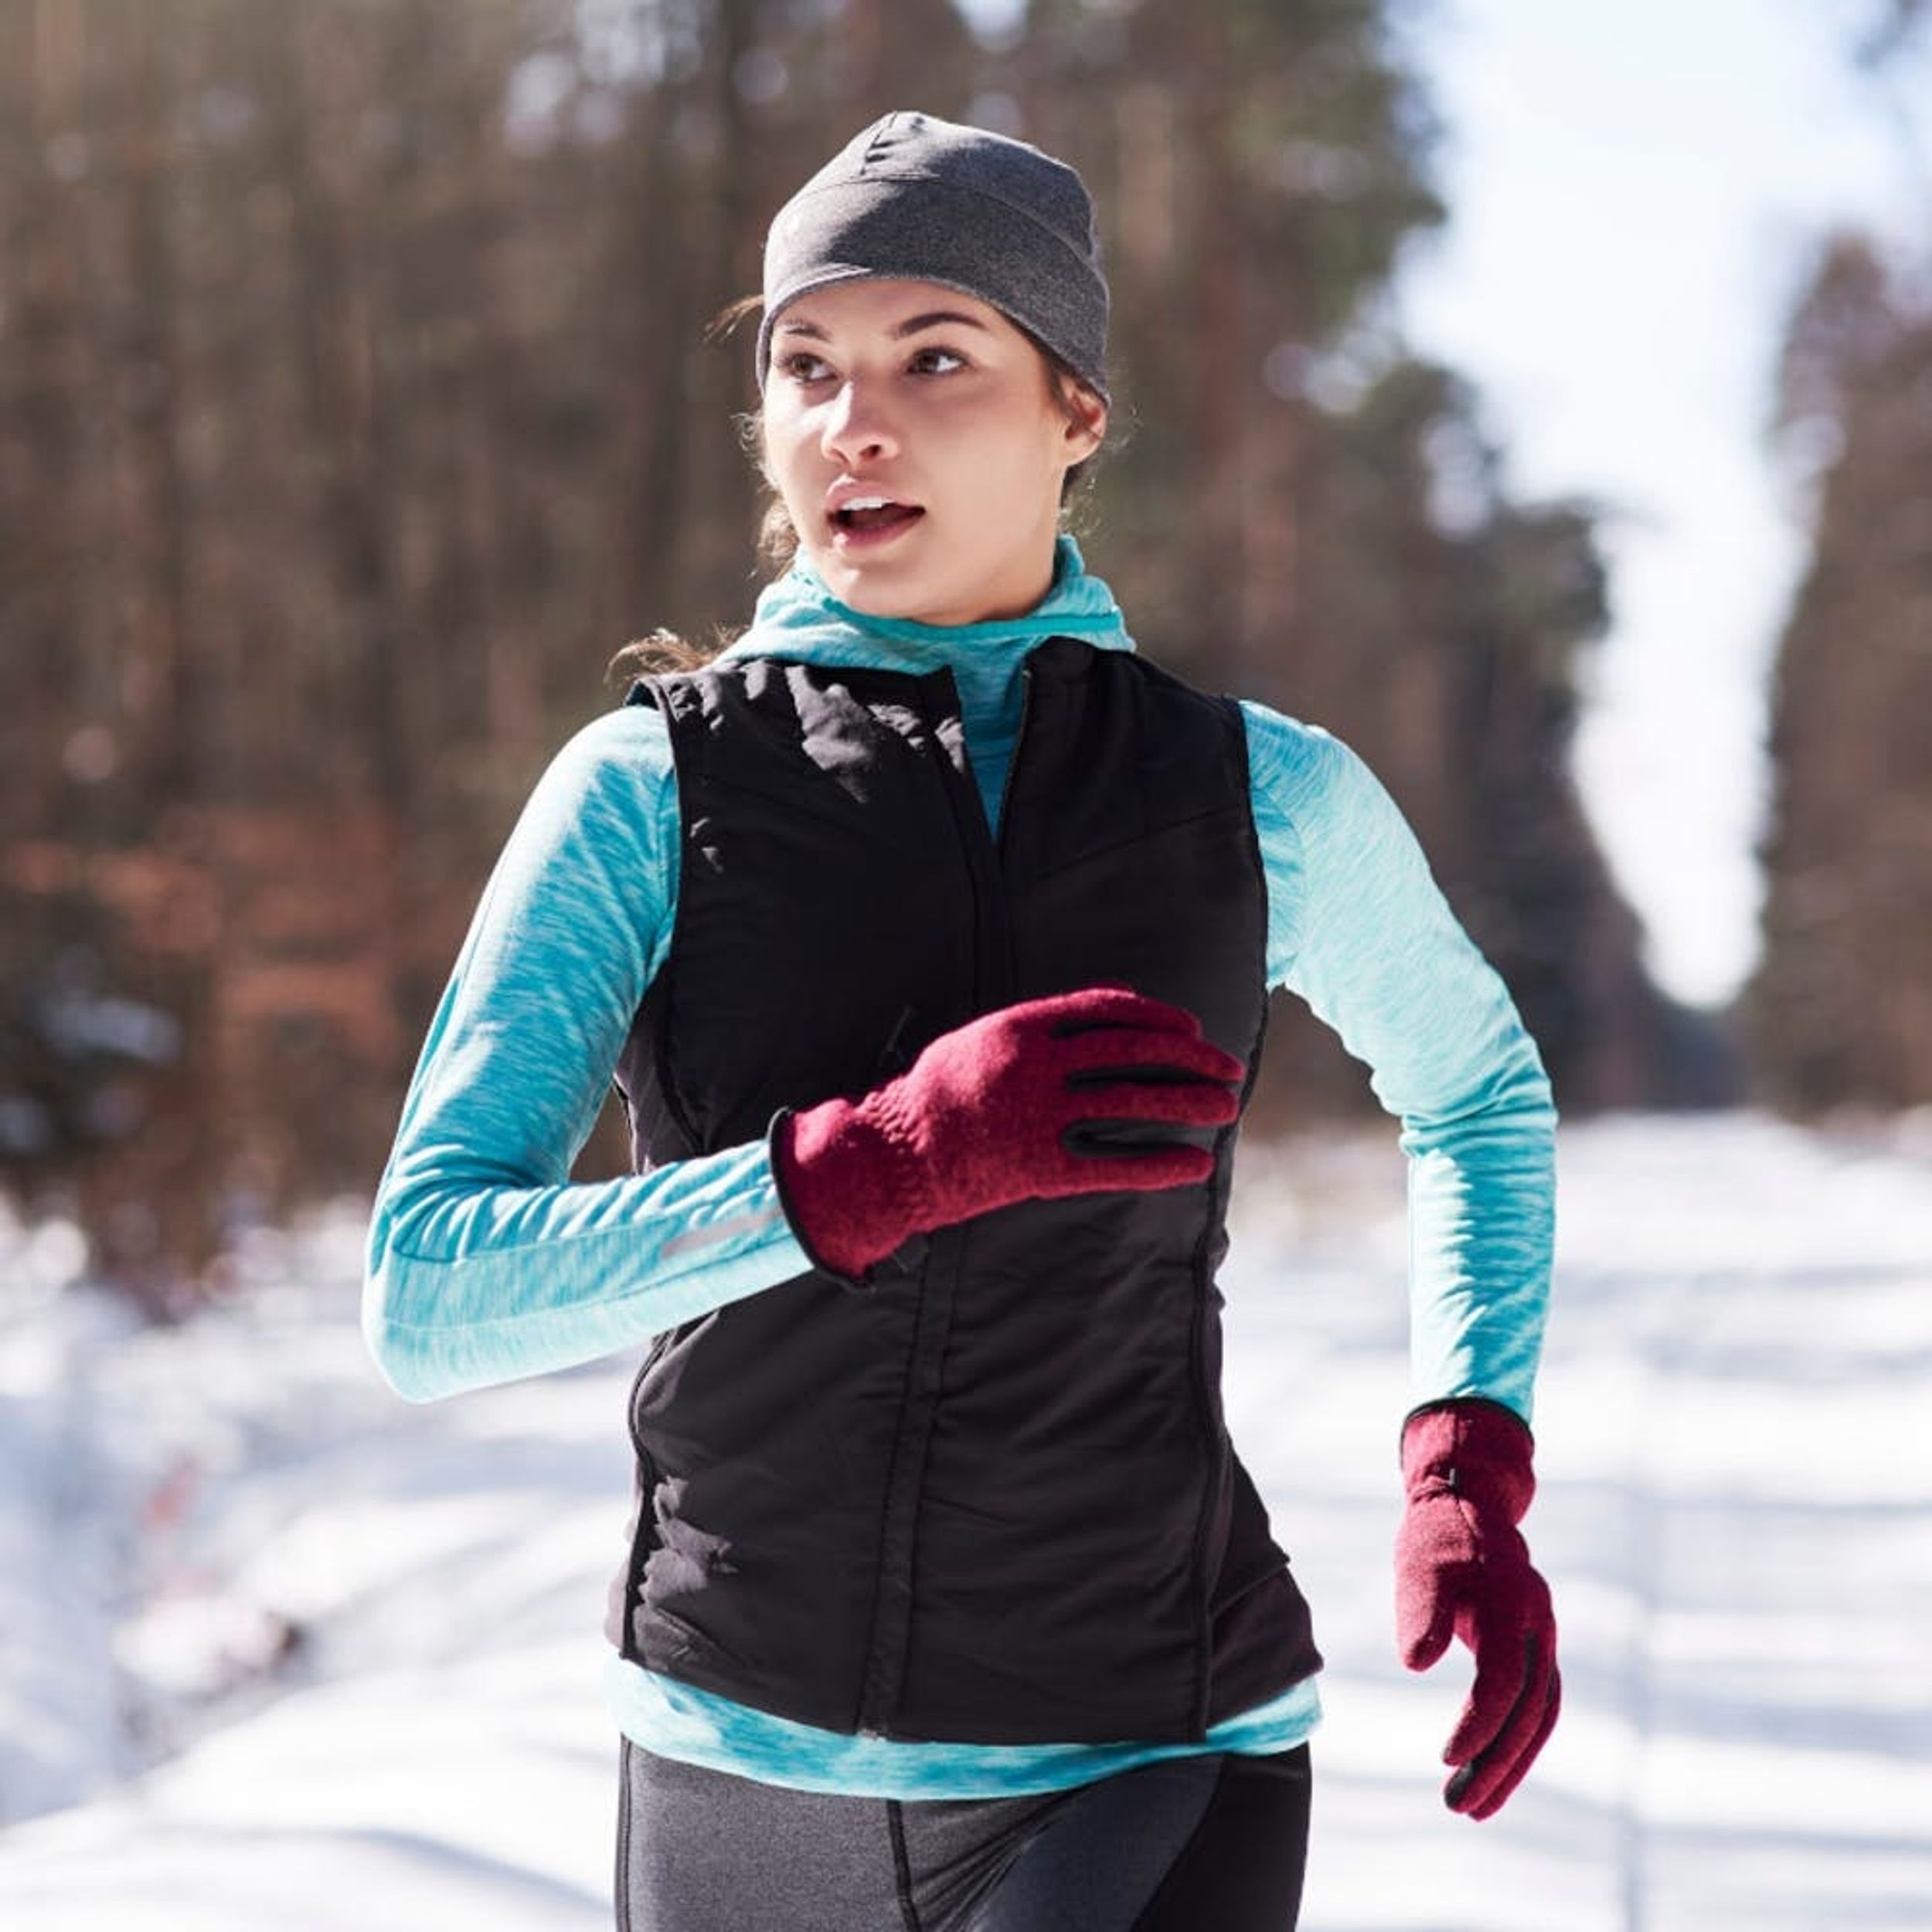 5 Tips to Warm Up Your Winter Workouts